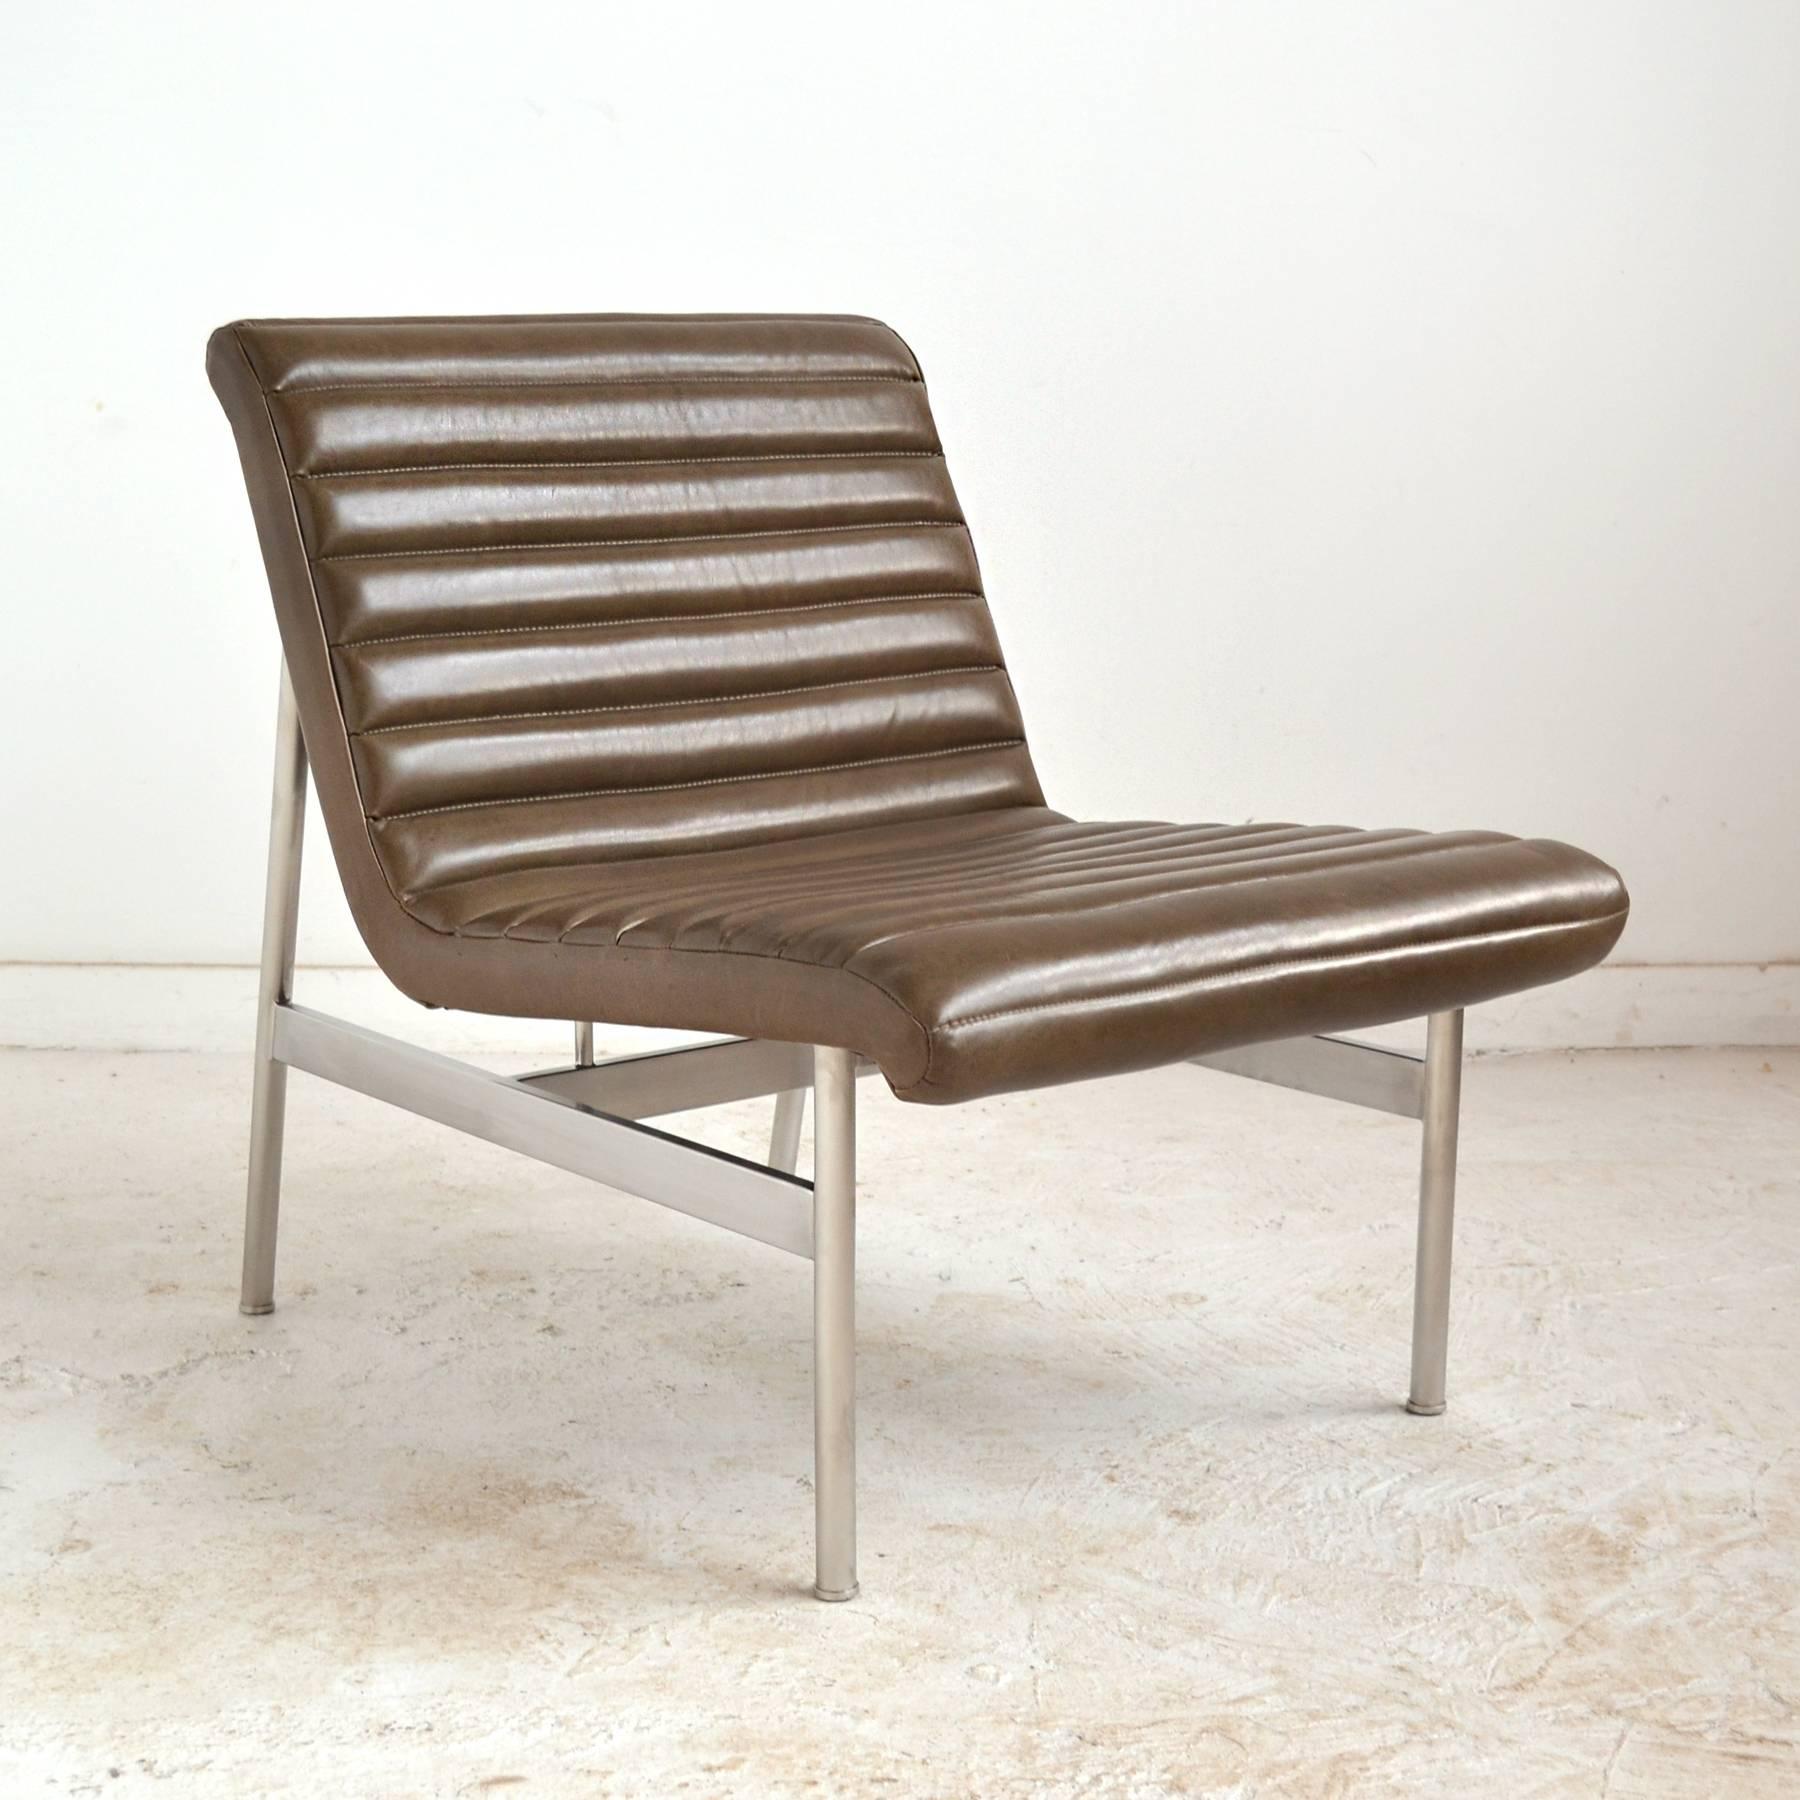 Stainless Steel Charles Pollock Pair of cp1 Lounge Chairs by Bernhardt